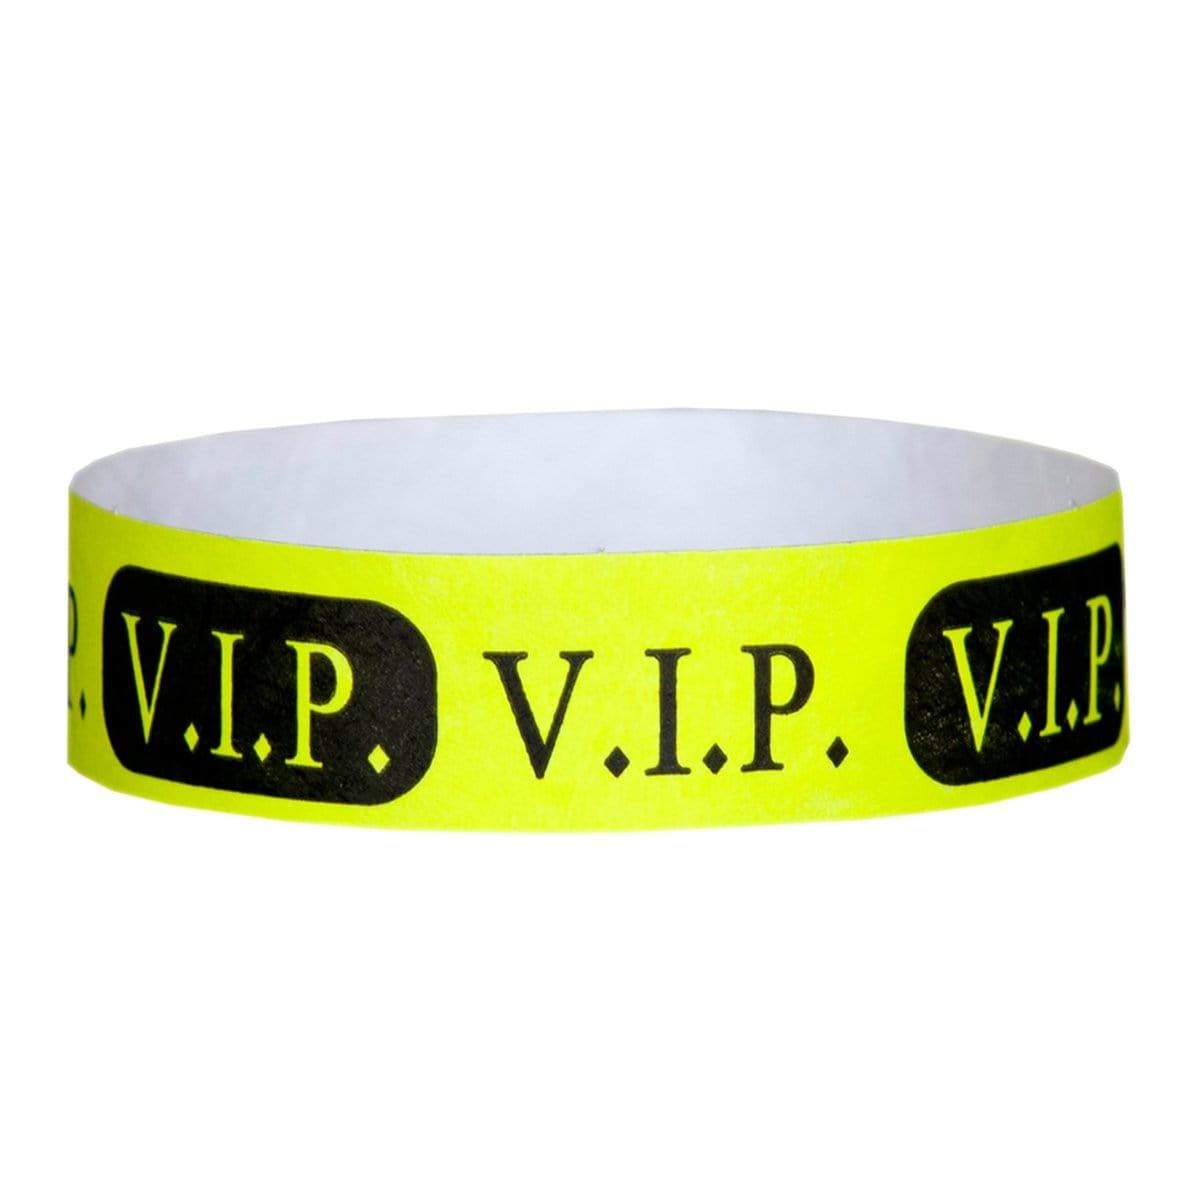 Buy Party Supplies Wristband Supertek - Yellow Glow 3/4 in. 100/pkg sold at Party Expert